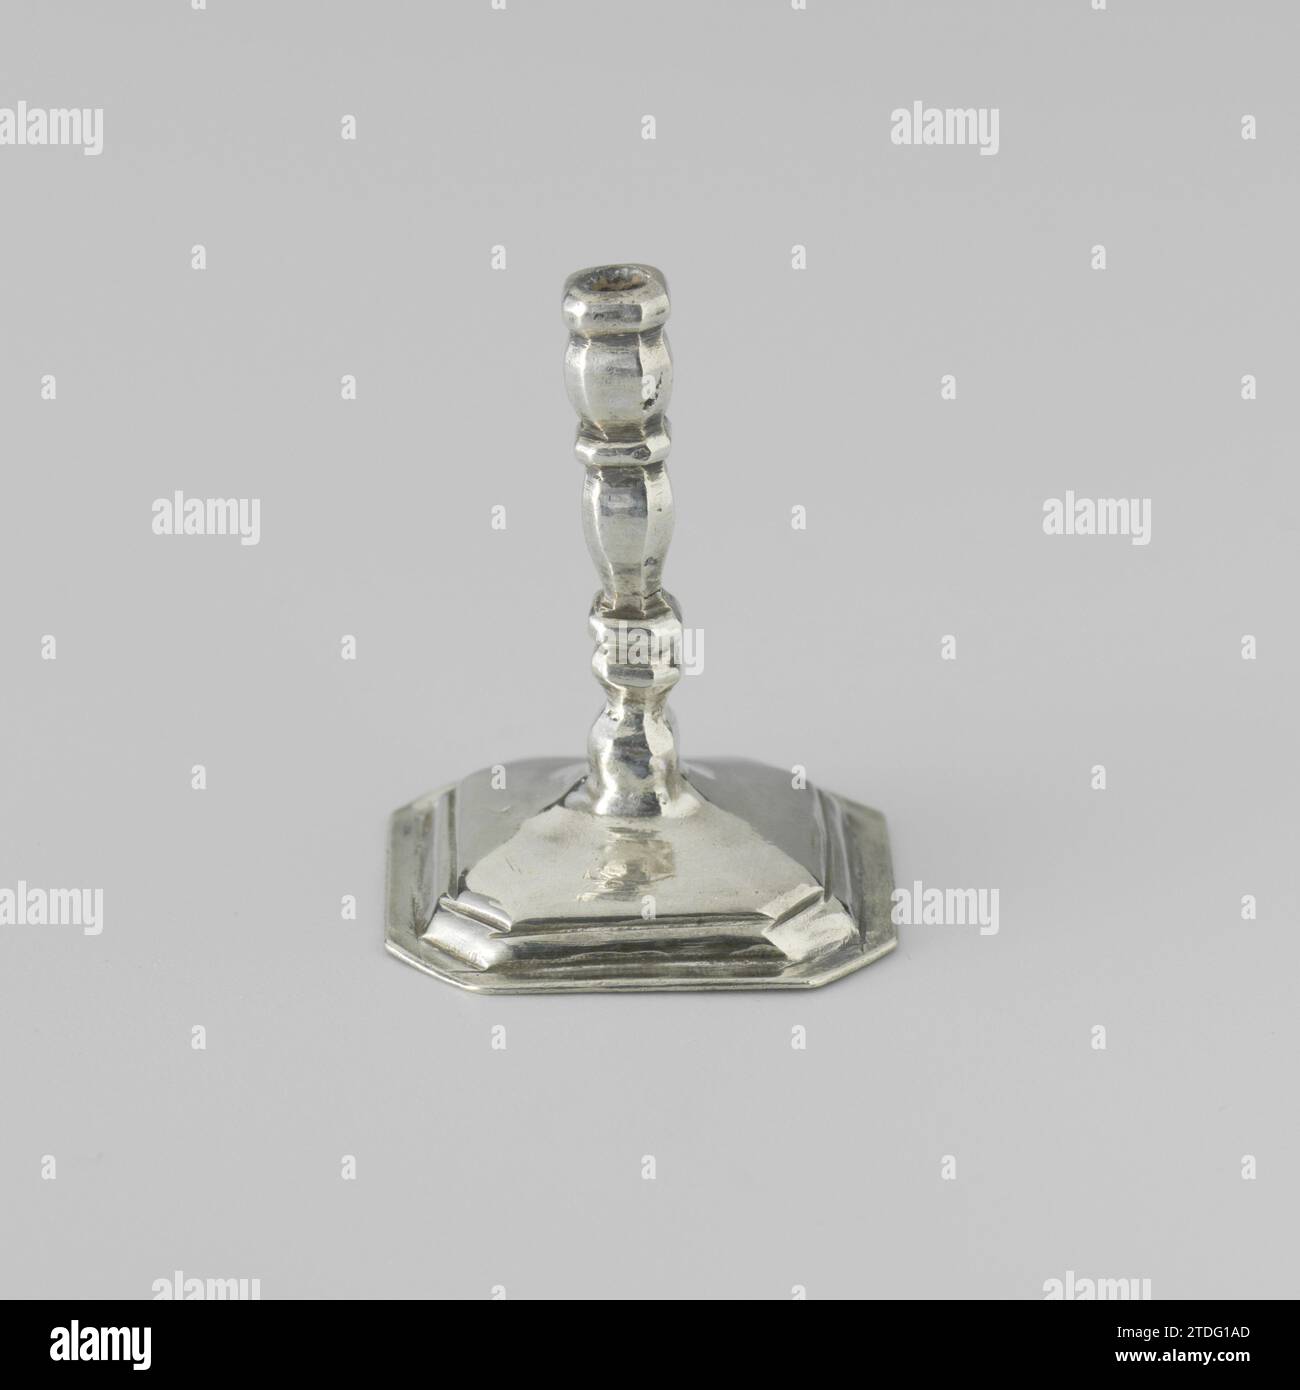 Candlestick, anonymous, c. 1704 - c. 1734 Candlestick on a square, curved foot with beveled corners. The trunk of the candlestick and the edge of the foot are profiled. The candlestick is marked: stk. = Amsterdam, Mt. = Citroen 1975, no. 970 and an ax. The candlestick is the same as the candlestick with invnr. BK-NM-4336-J. Amsterdam silver (metal) Candlestick on a square, curved foot with beveled corners. The trunk of the candlestick and the edge of the foot are profiled. The candlestick is marked: stk. = Amsterdam, Mt. = Citroen 1975, no. 970 and an ax. The candlestick is the same as the can Stock Photo